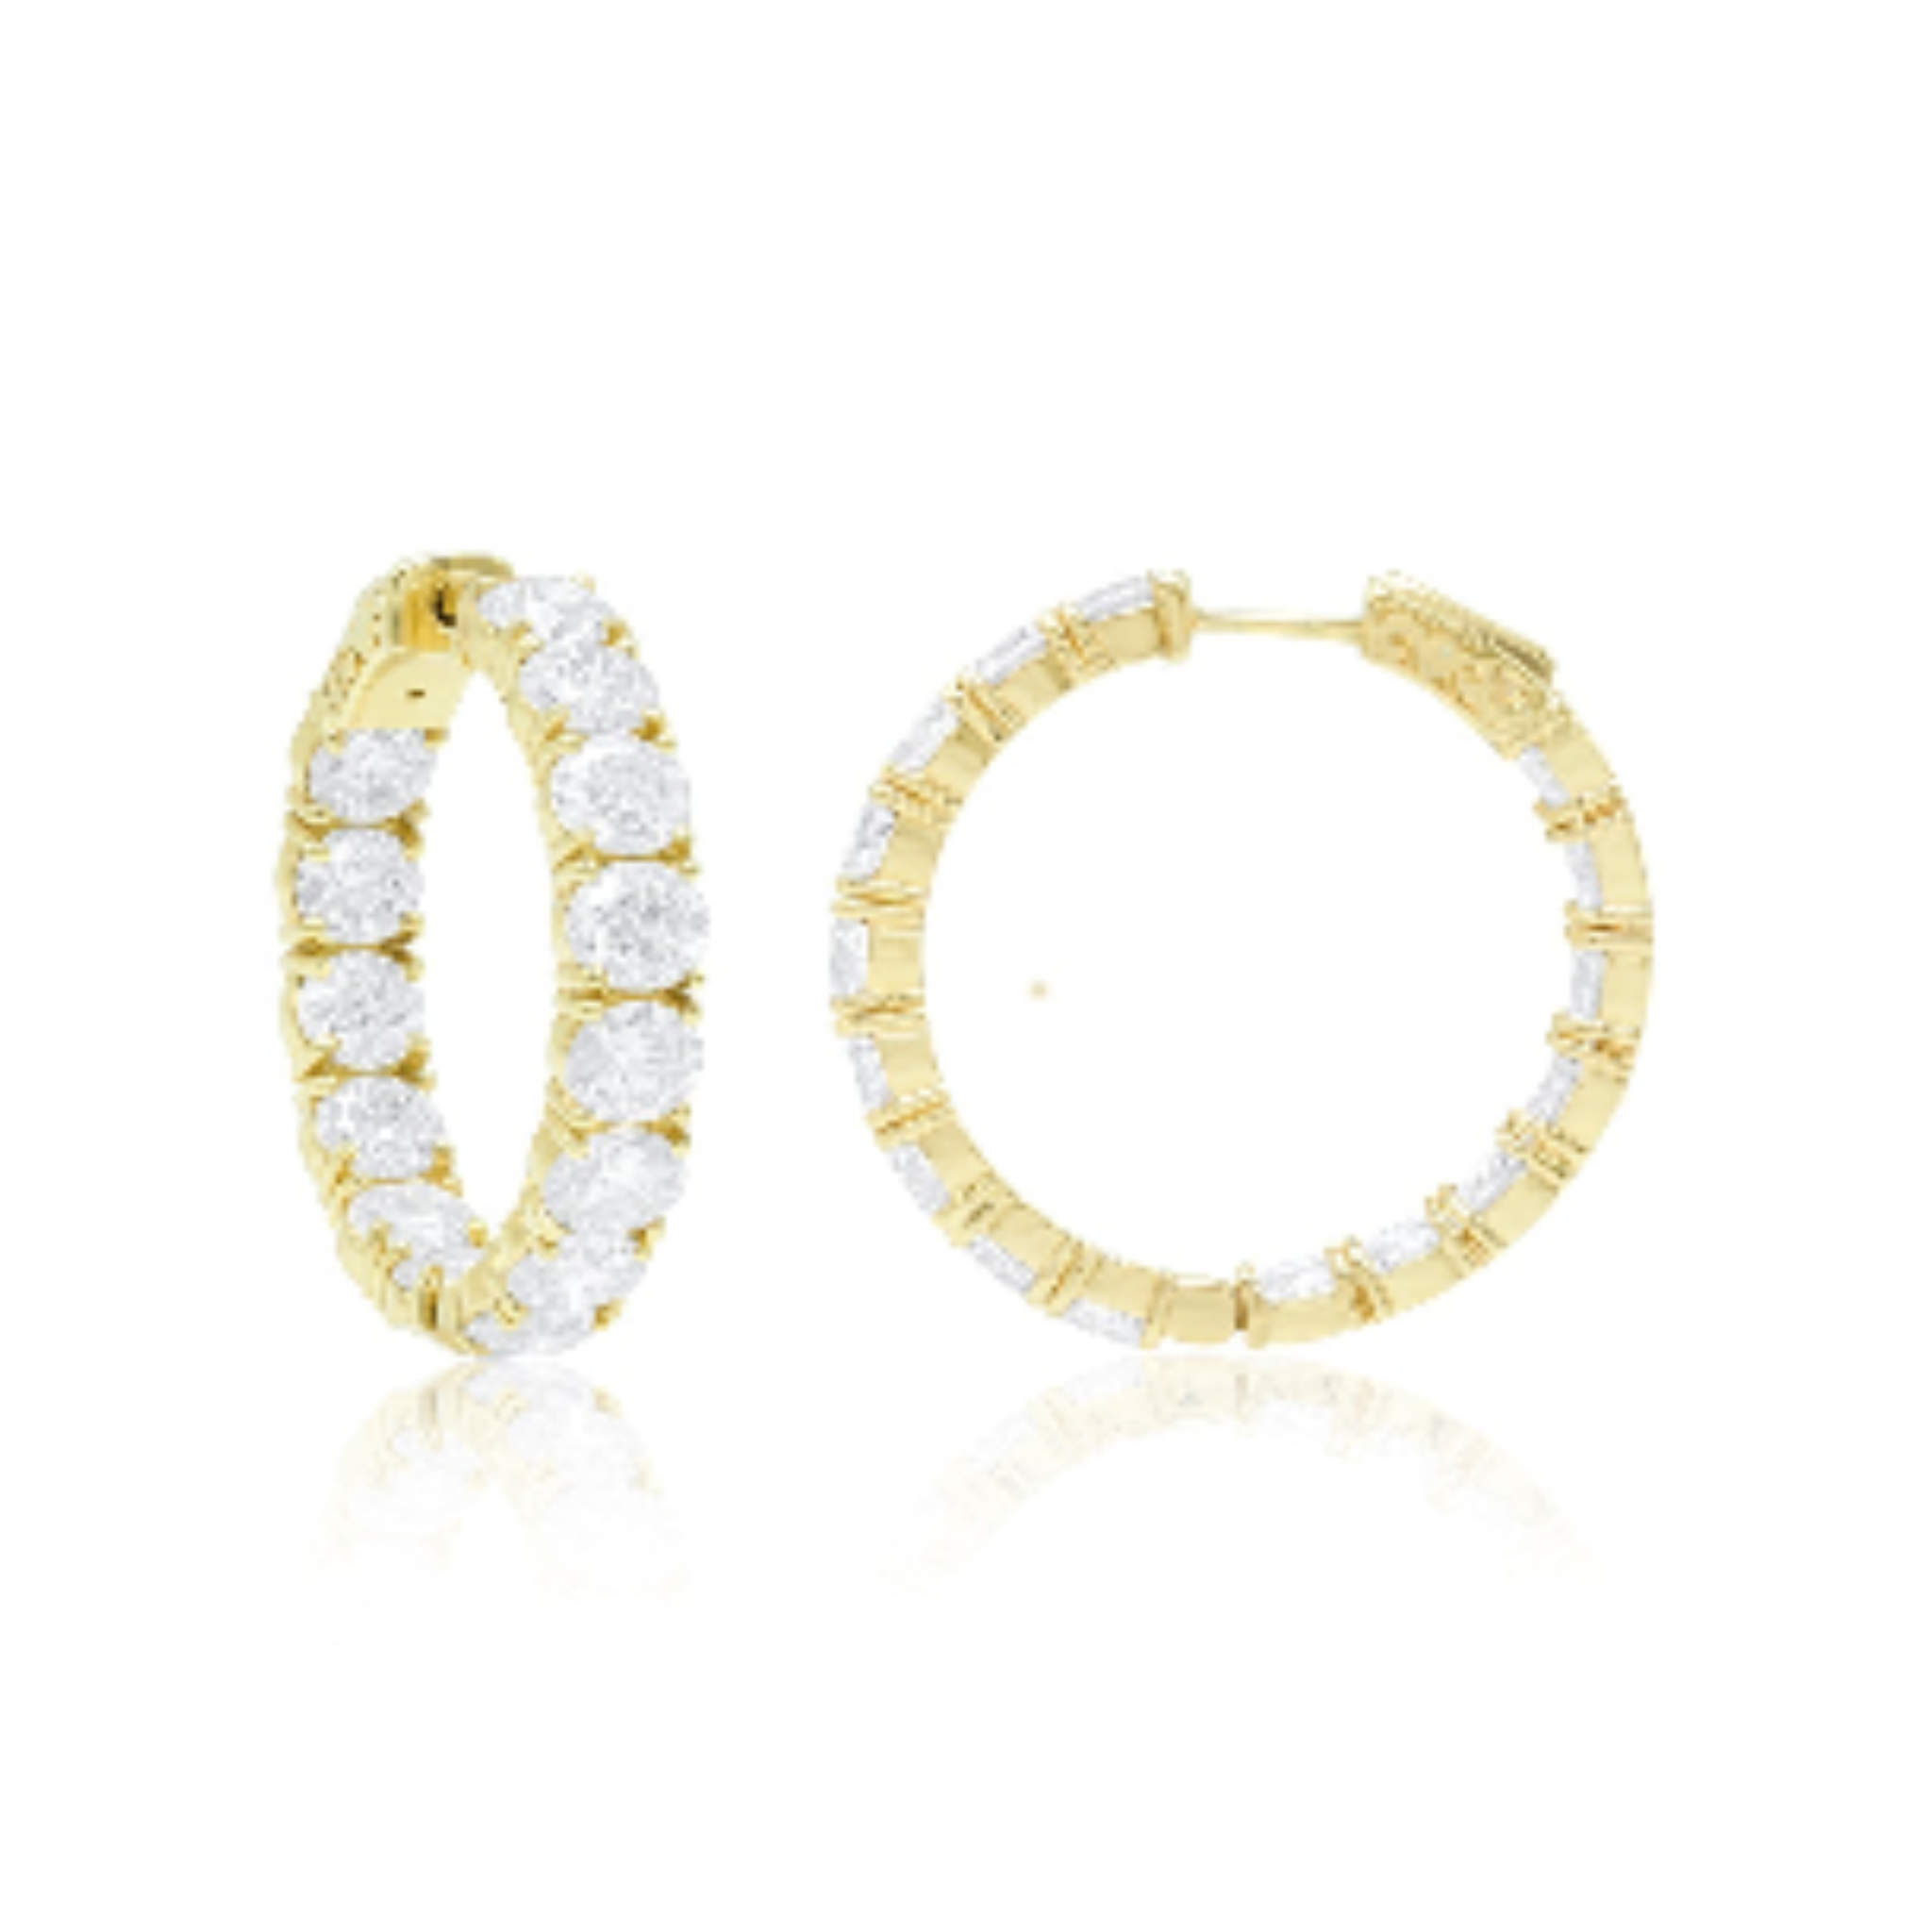 18 Kt Yellow Gold 1.00" Hoop Earrings with 12.07 cts.jpg